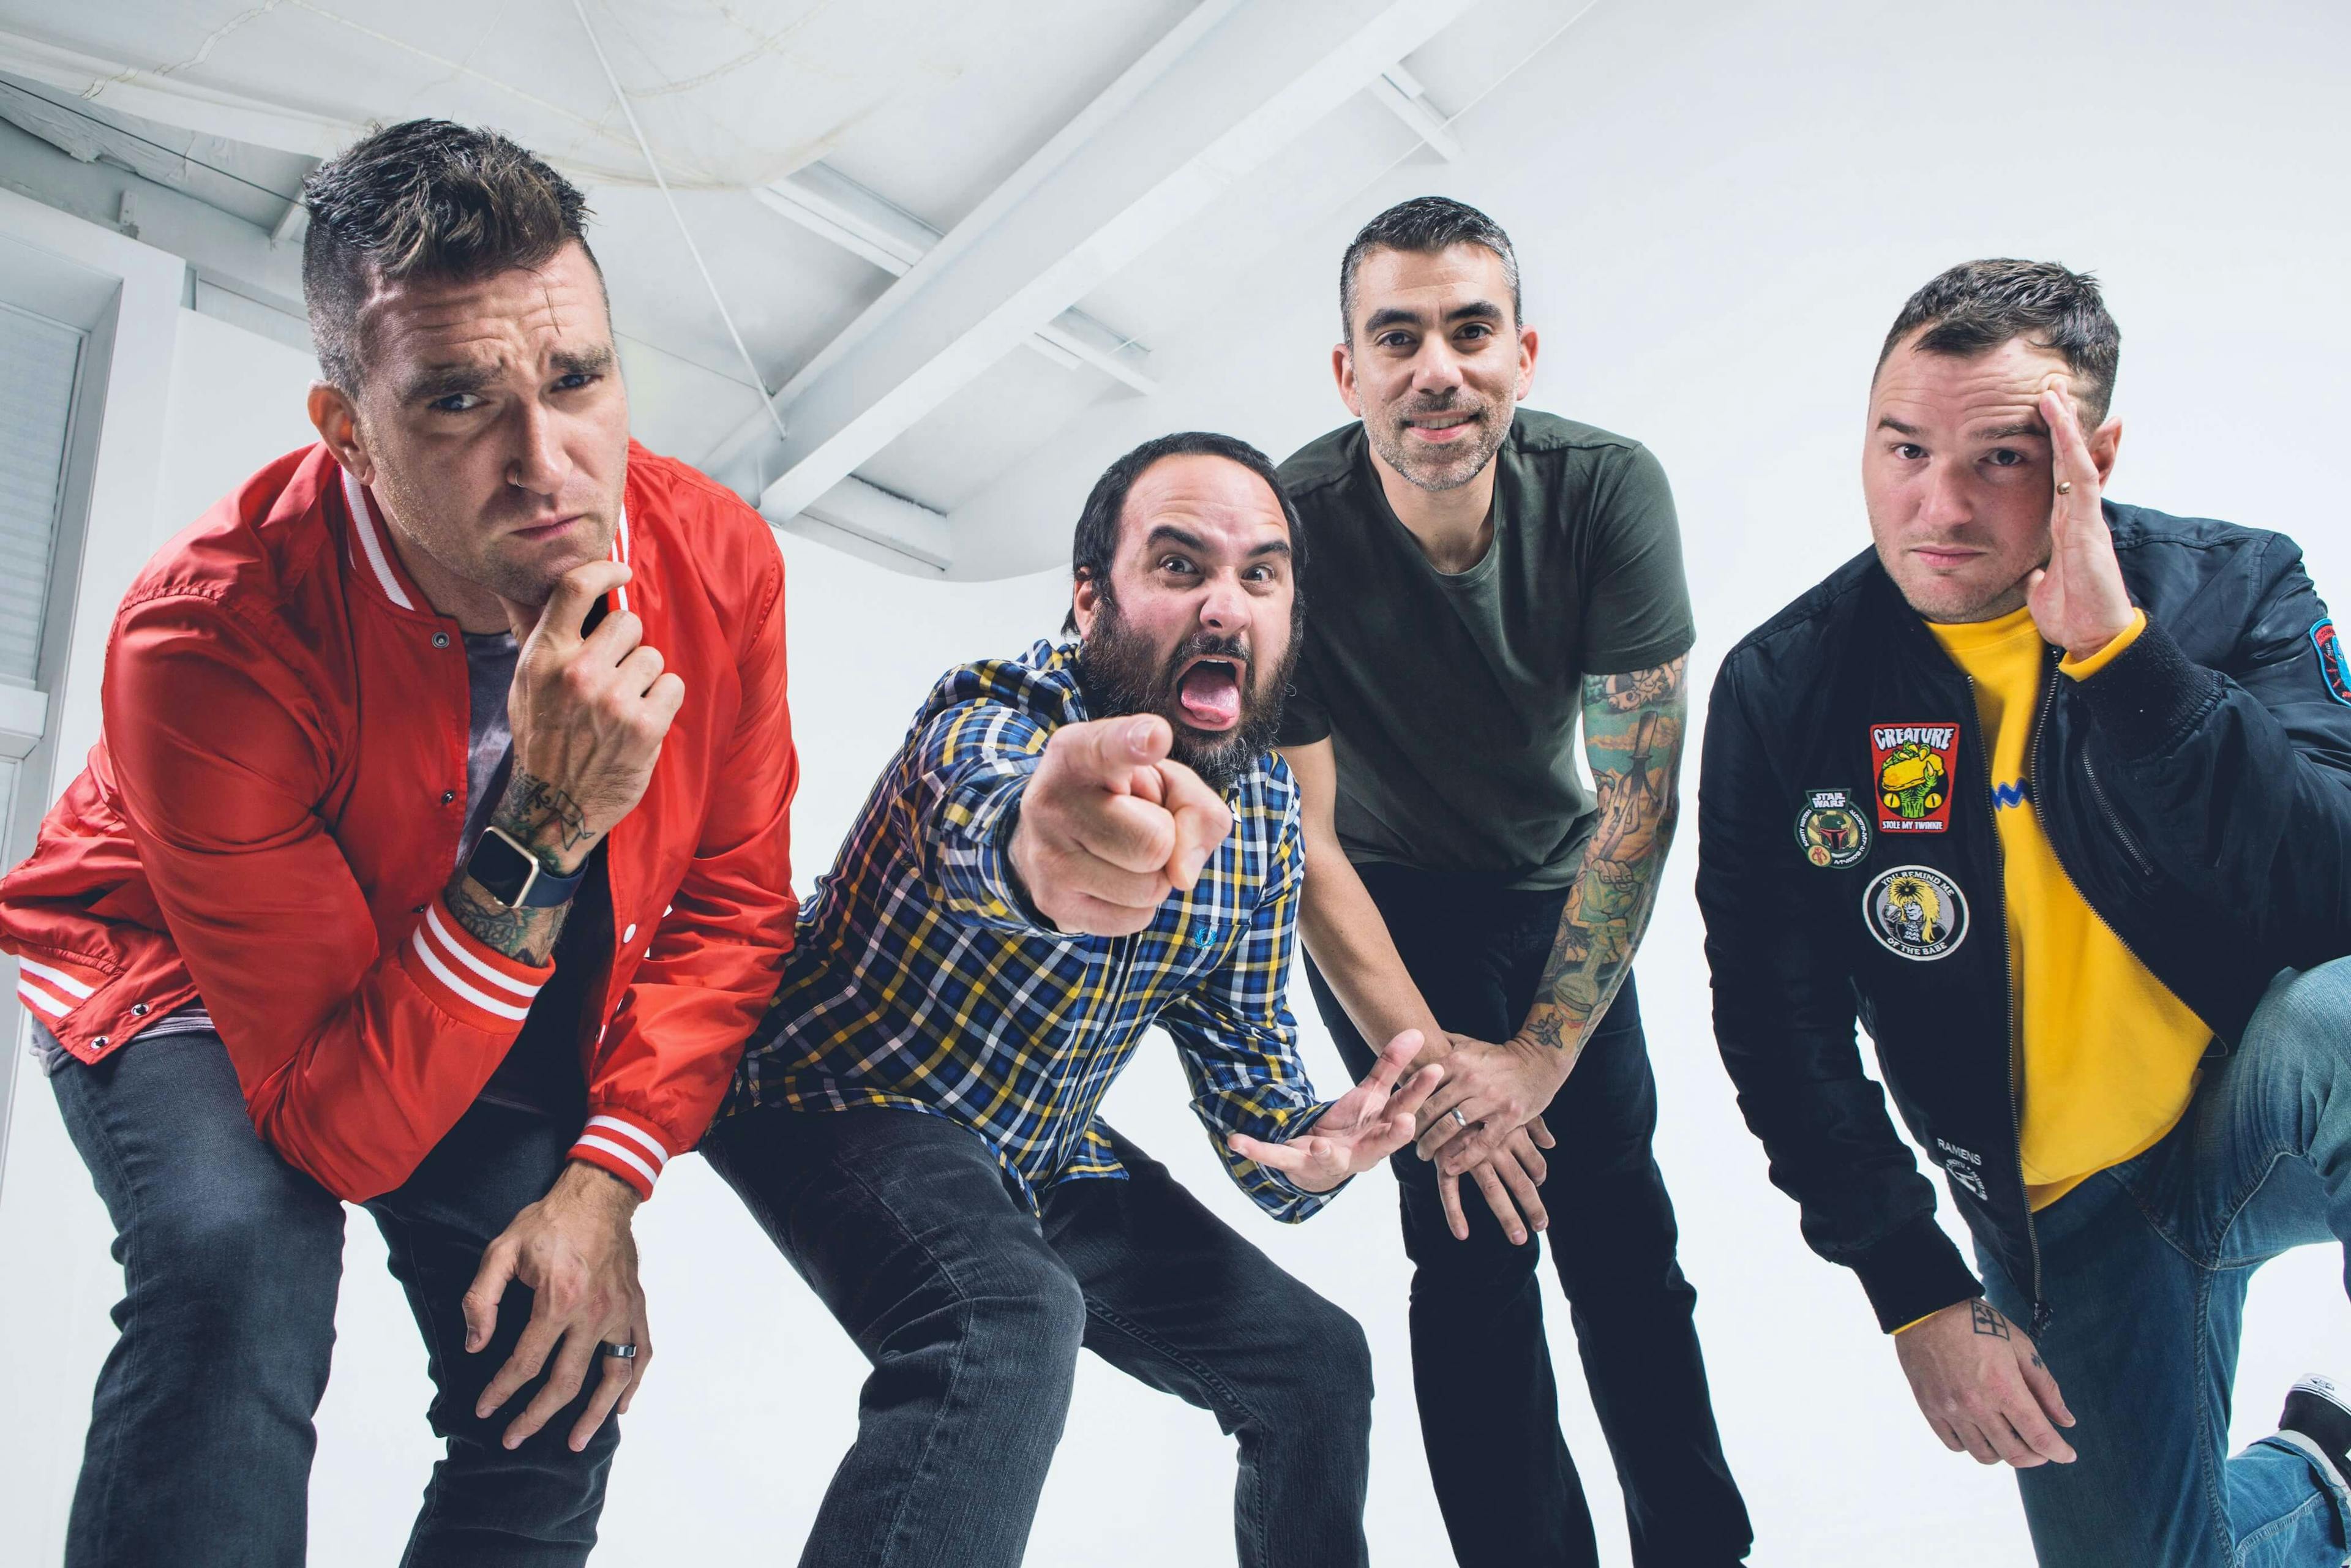 Anyone Up For Interviewing New Found Glory For Us?